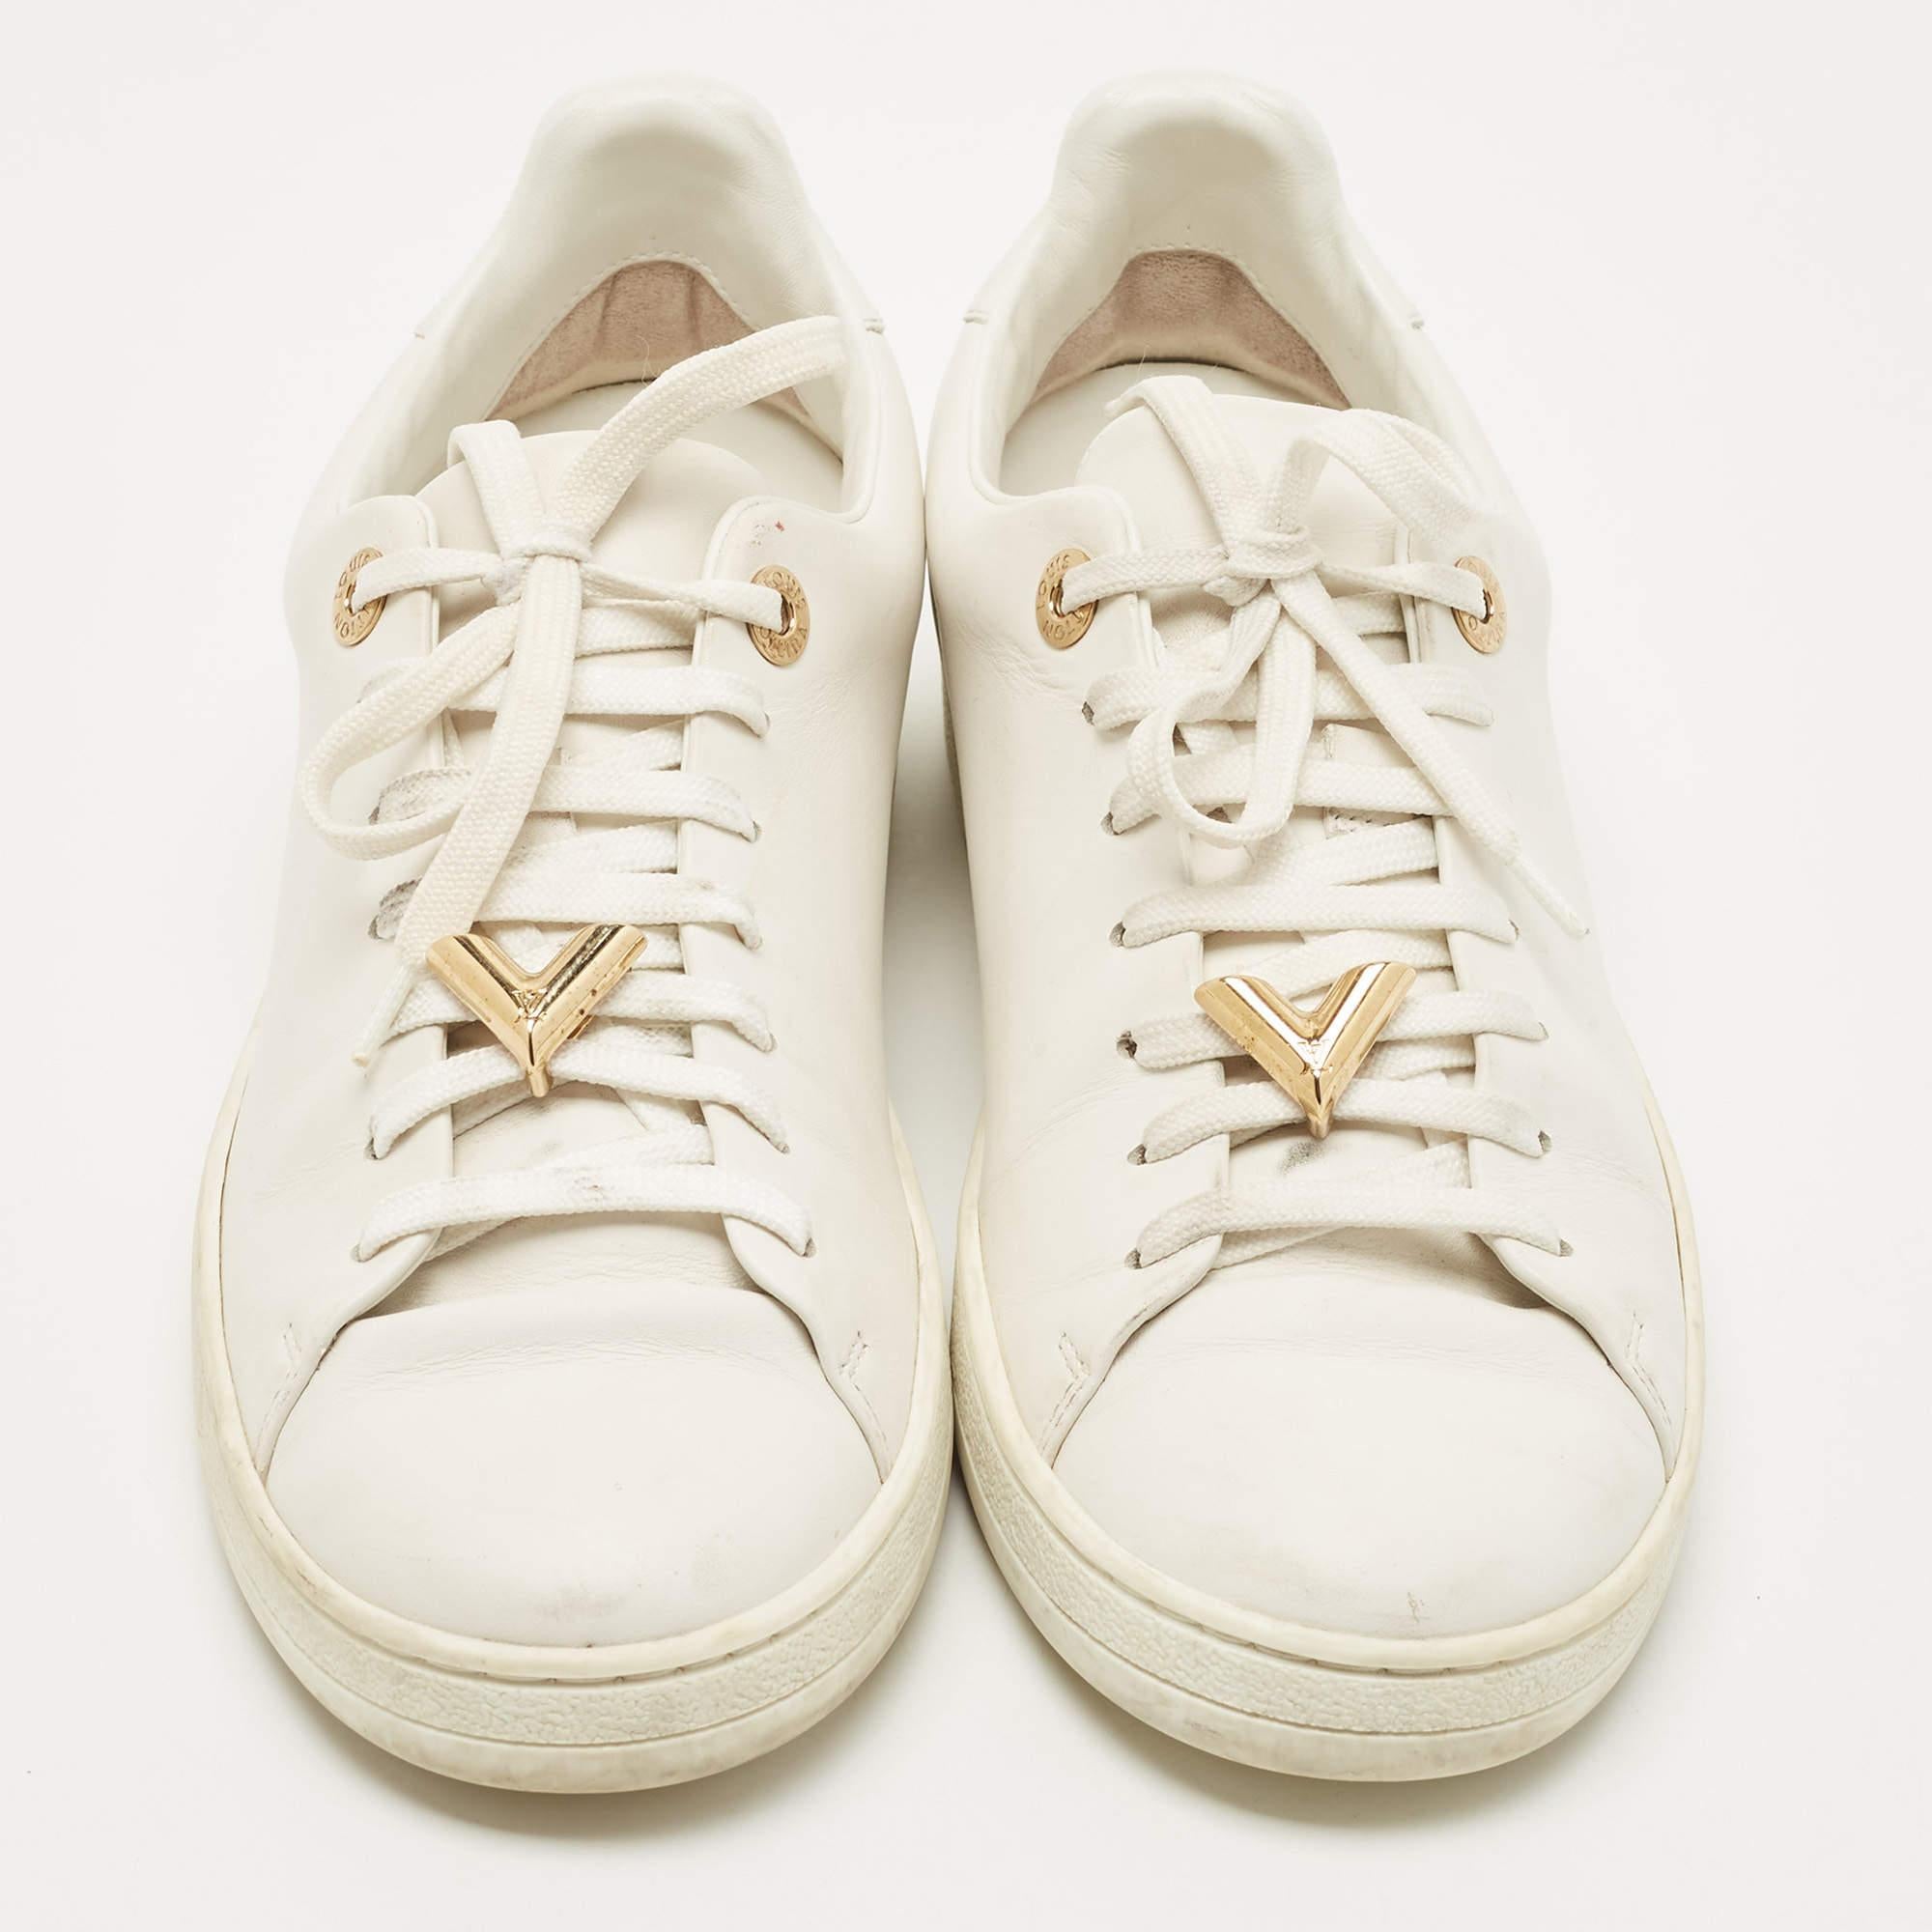 You'll love wearing these Frontrow sneakers from Louis Vuitton! The white sneakers are crafted from leather and feature round toes along with gold-tone logo accents on the lace-up vamps as well as on the midsoles. They come equipped with comfortable